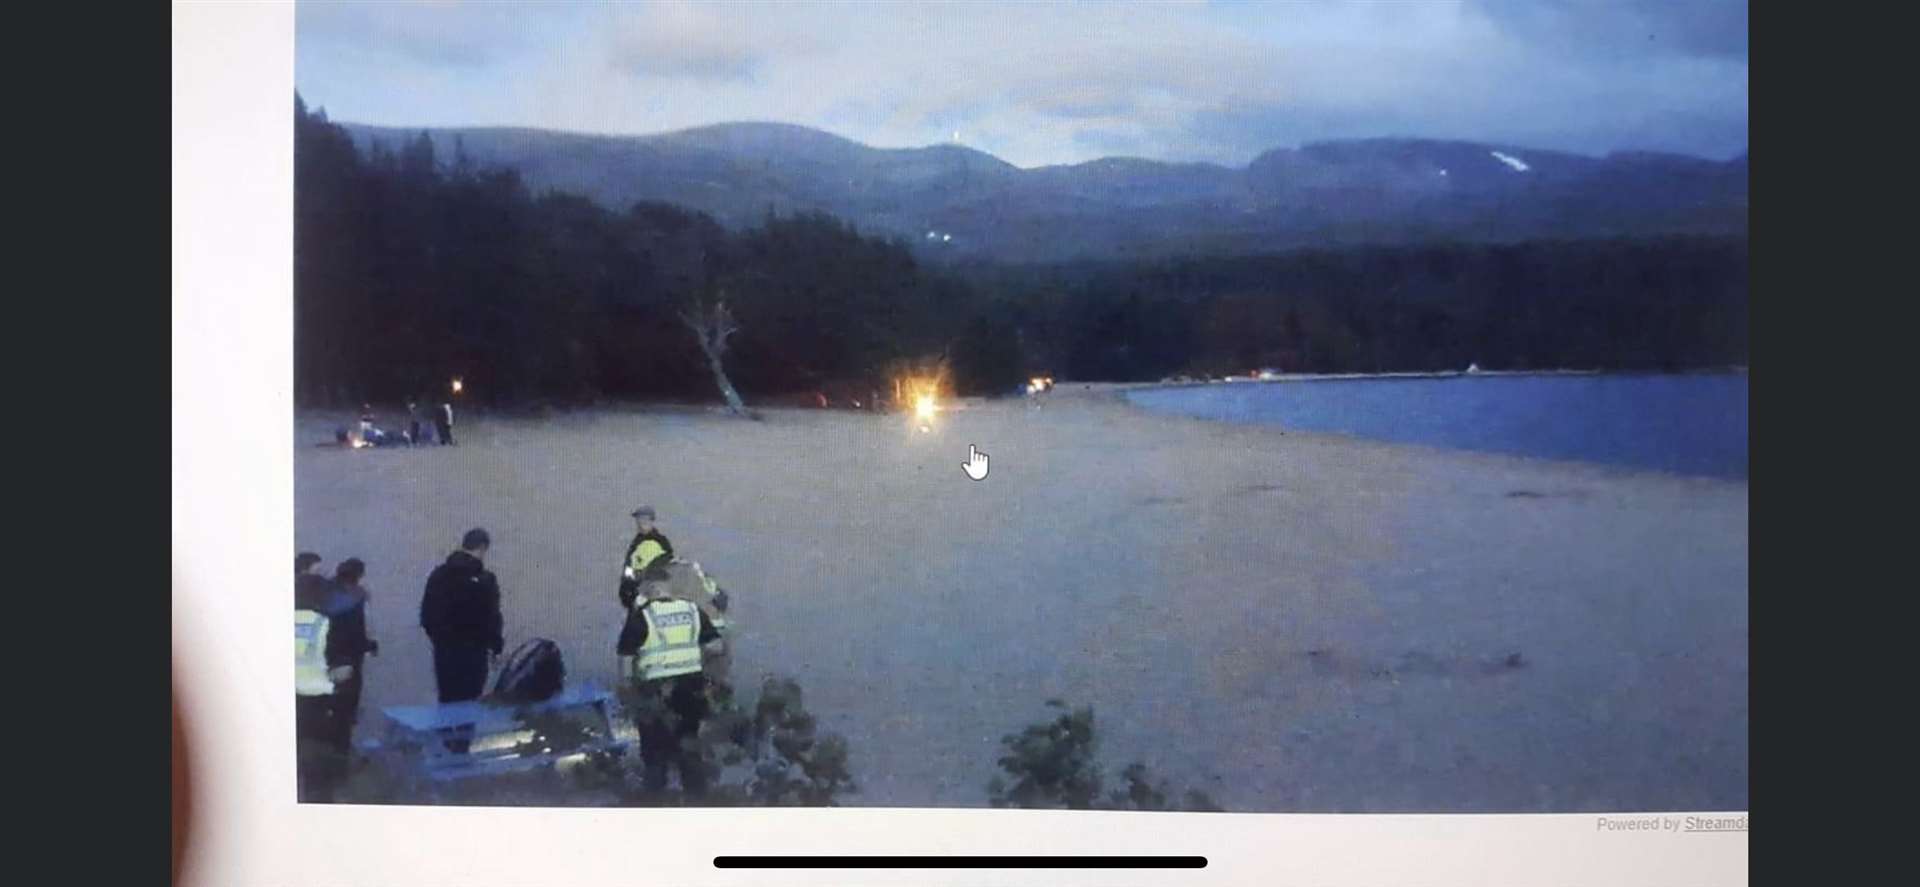 Police officers at Loch Morlich over the weekend shown via the webcam at the beauty spot.